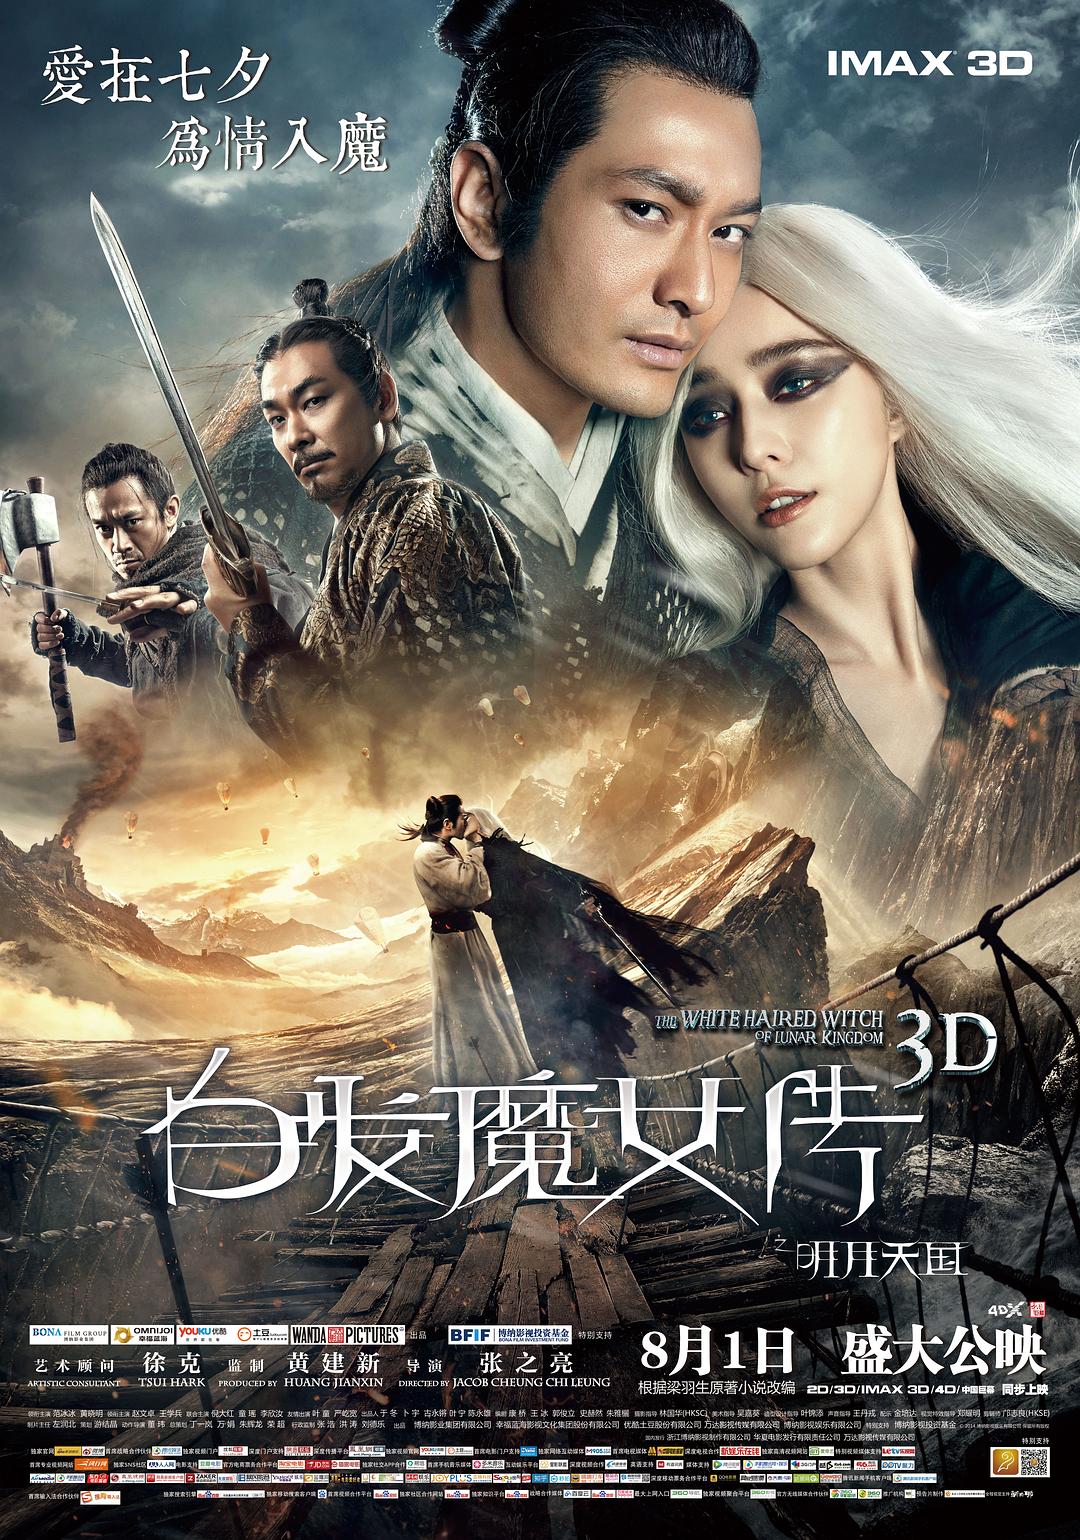 The White Haired Witch of Lunar Kingdom (2014) 1080p 3D-HSBS BluRay x264 + HINDI AUDIO LINK